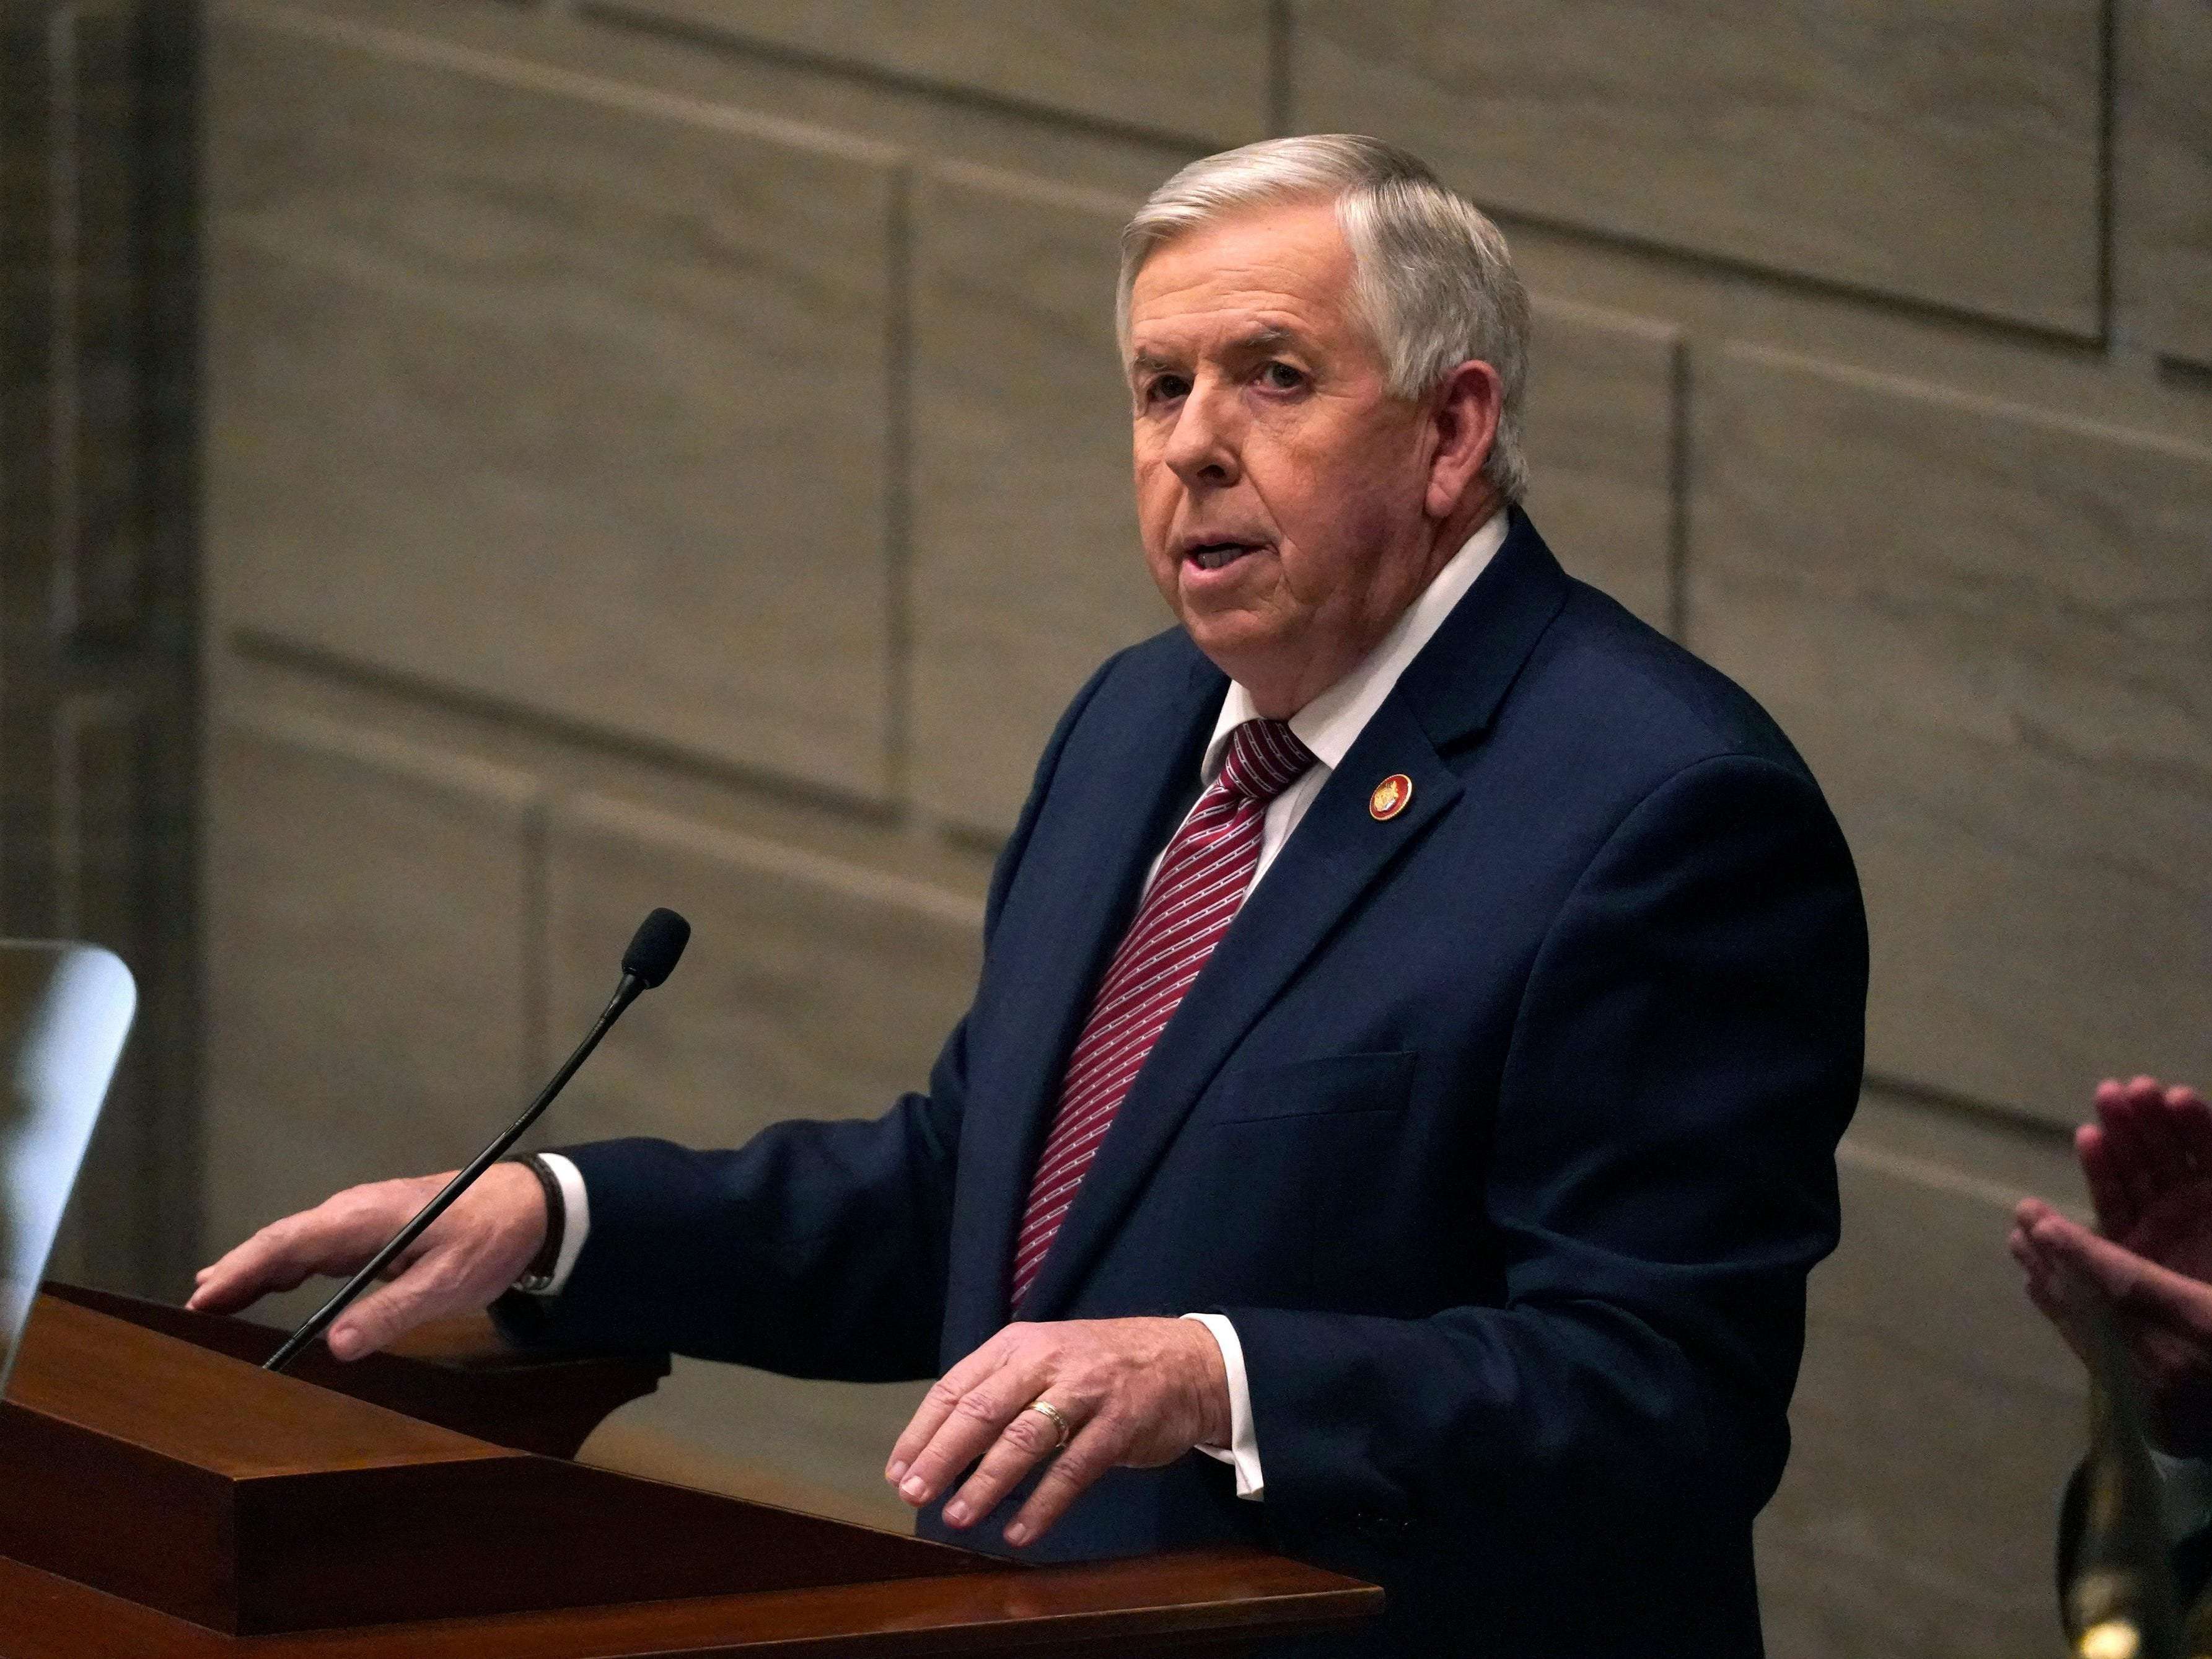 image for Missouri Gov. Mike Parson commissioned data on masks but didn’t release it after it showed they were effective: report